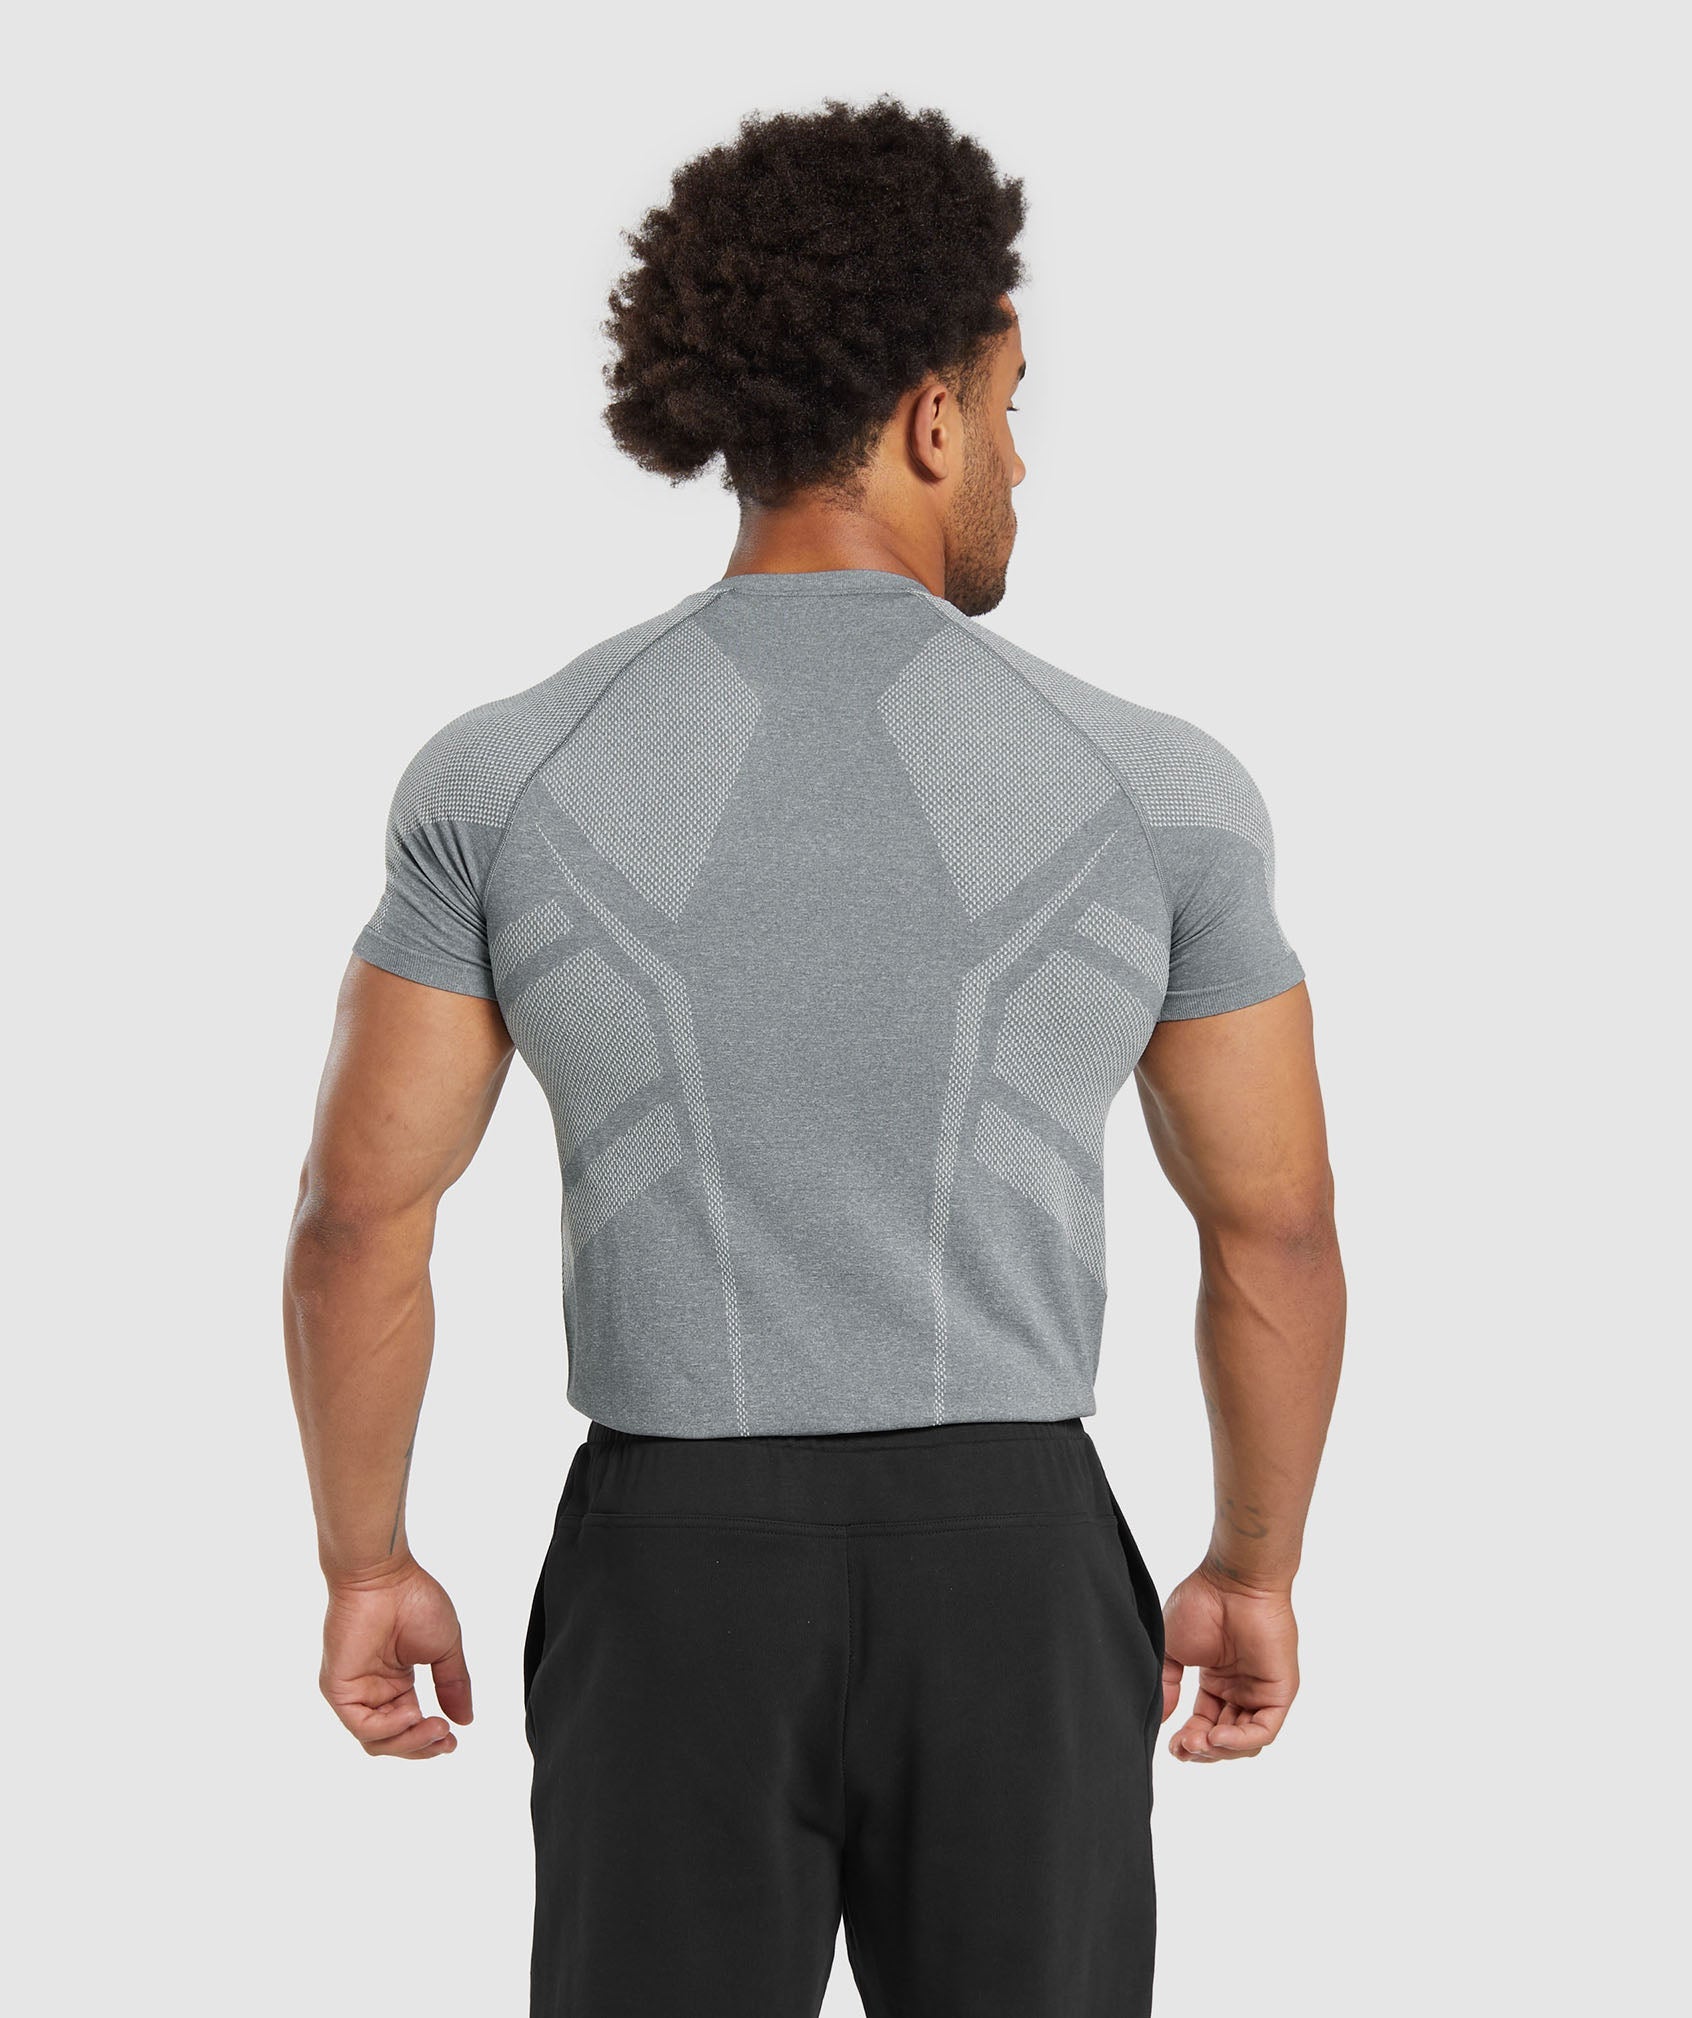 Elite Seamless T-Shirt in Pitch Grey/Light Grey - view 2